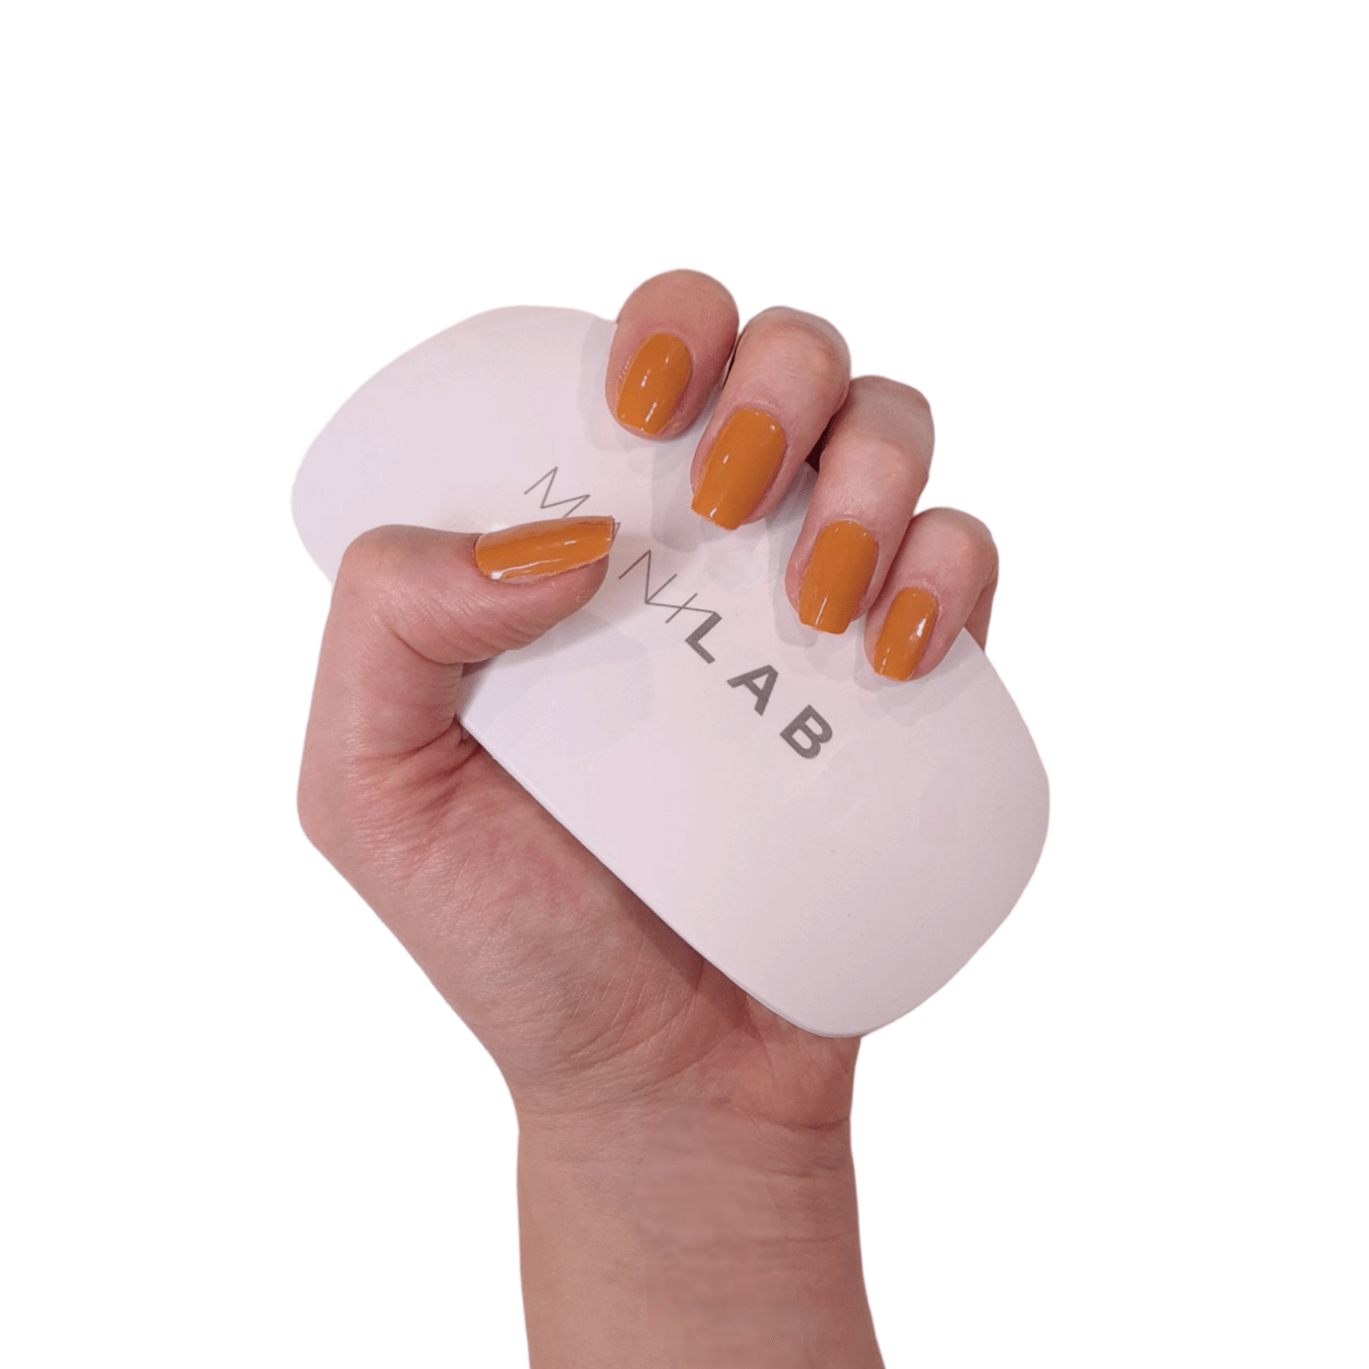 Our burnt orange semi-cured gel nails displayed on a hand 